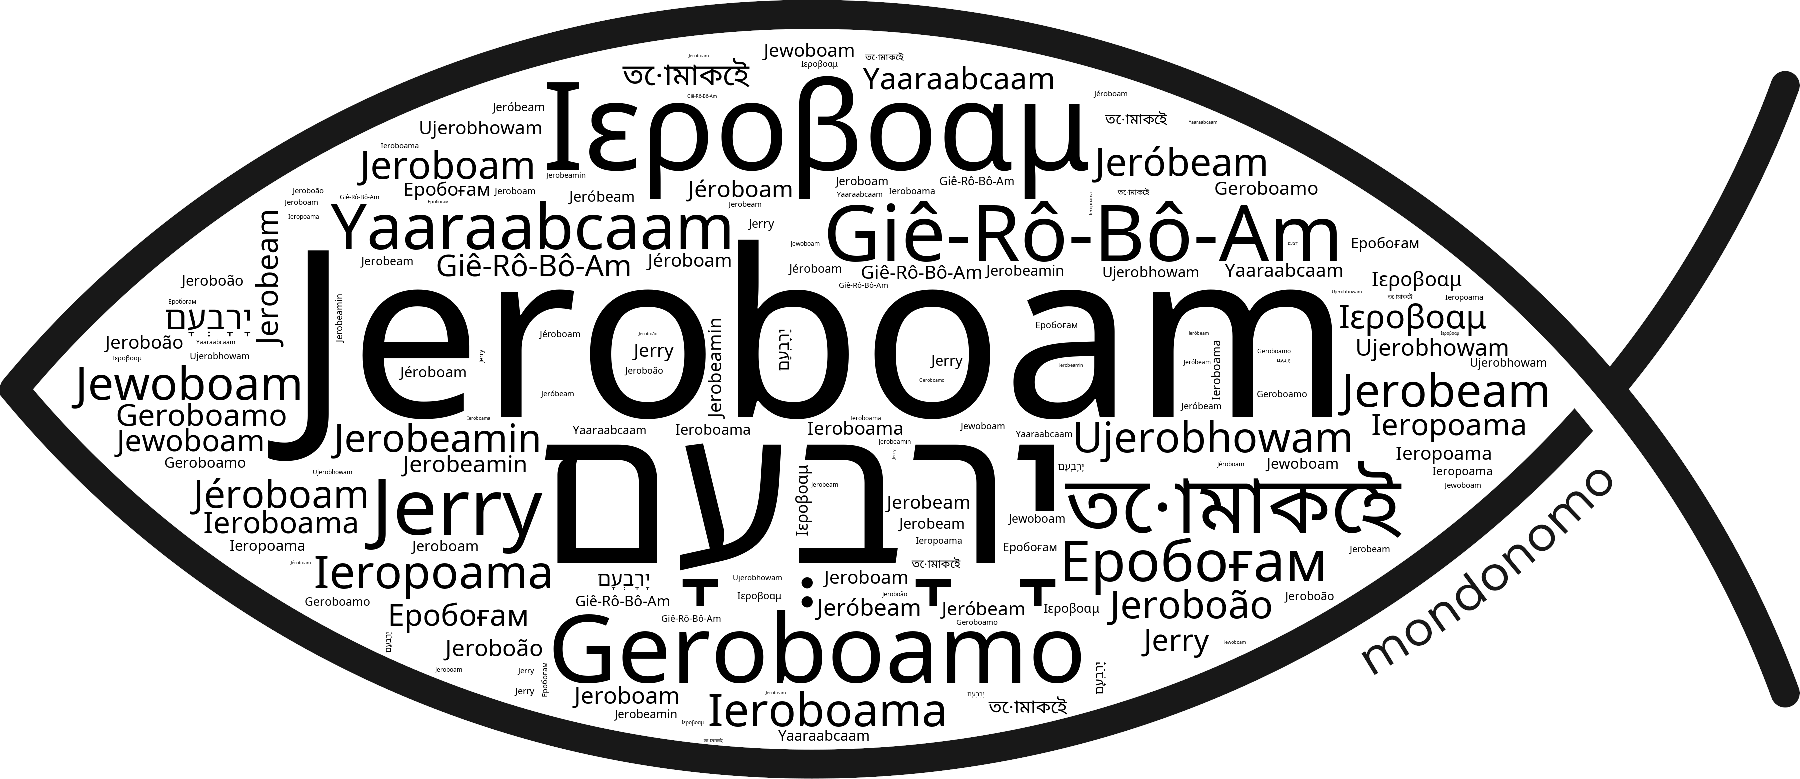 Name Jeroboam in the world's Bibles